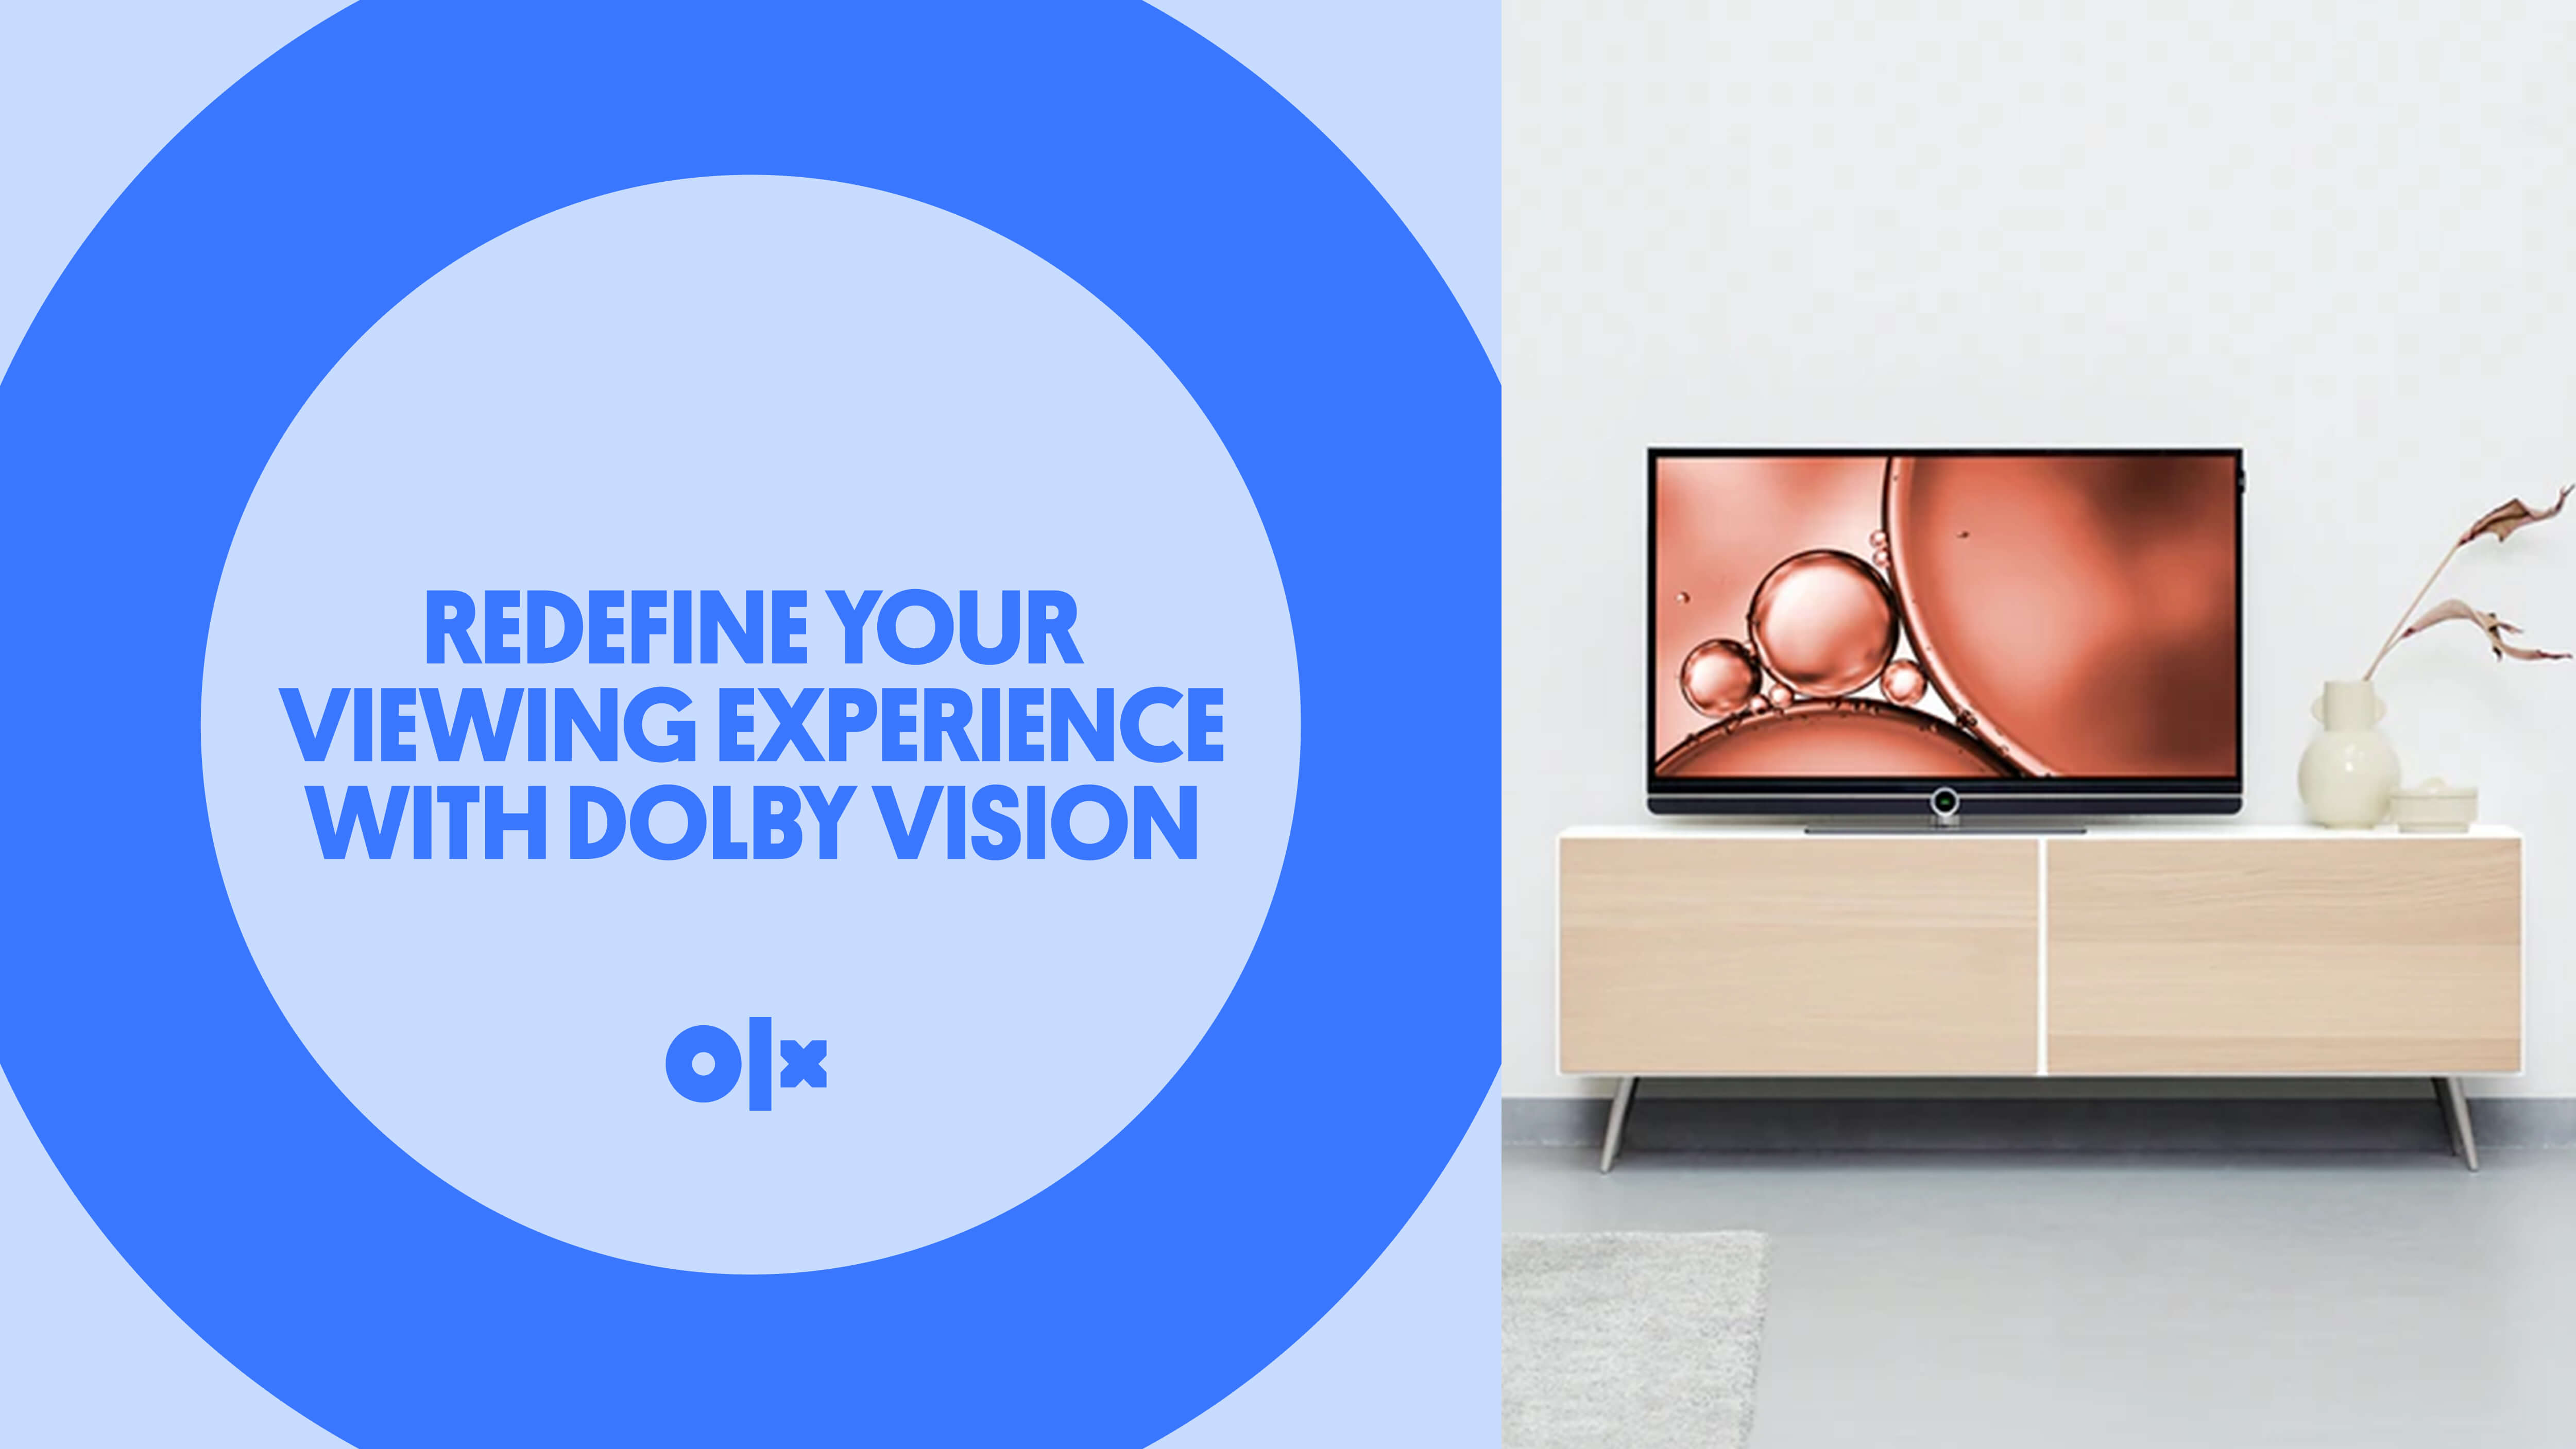 Redefine Your Viewing Experience With Dolby Vision